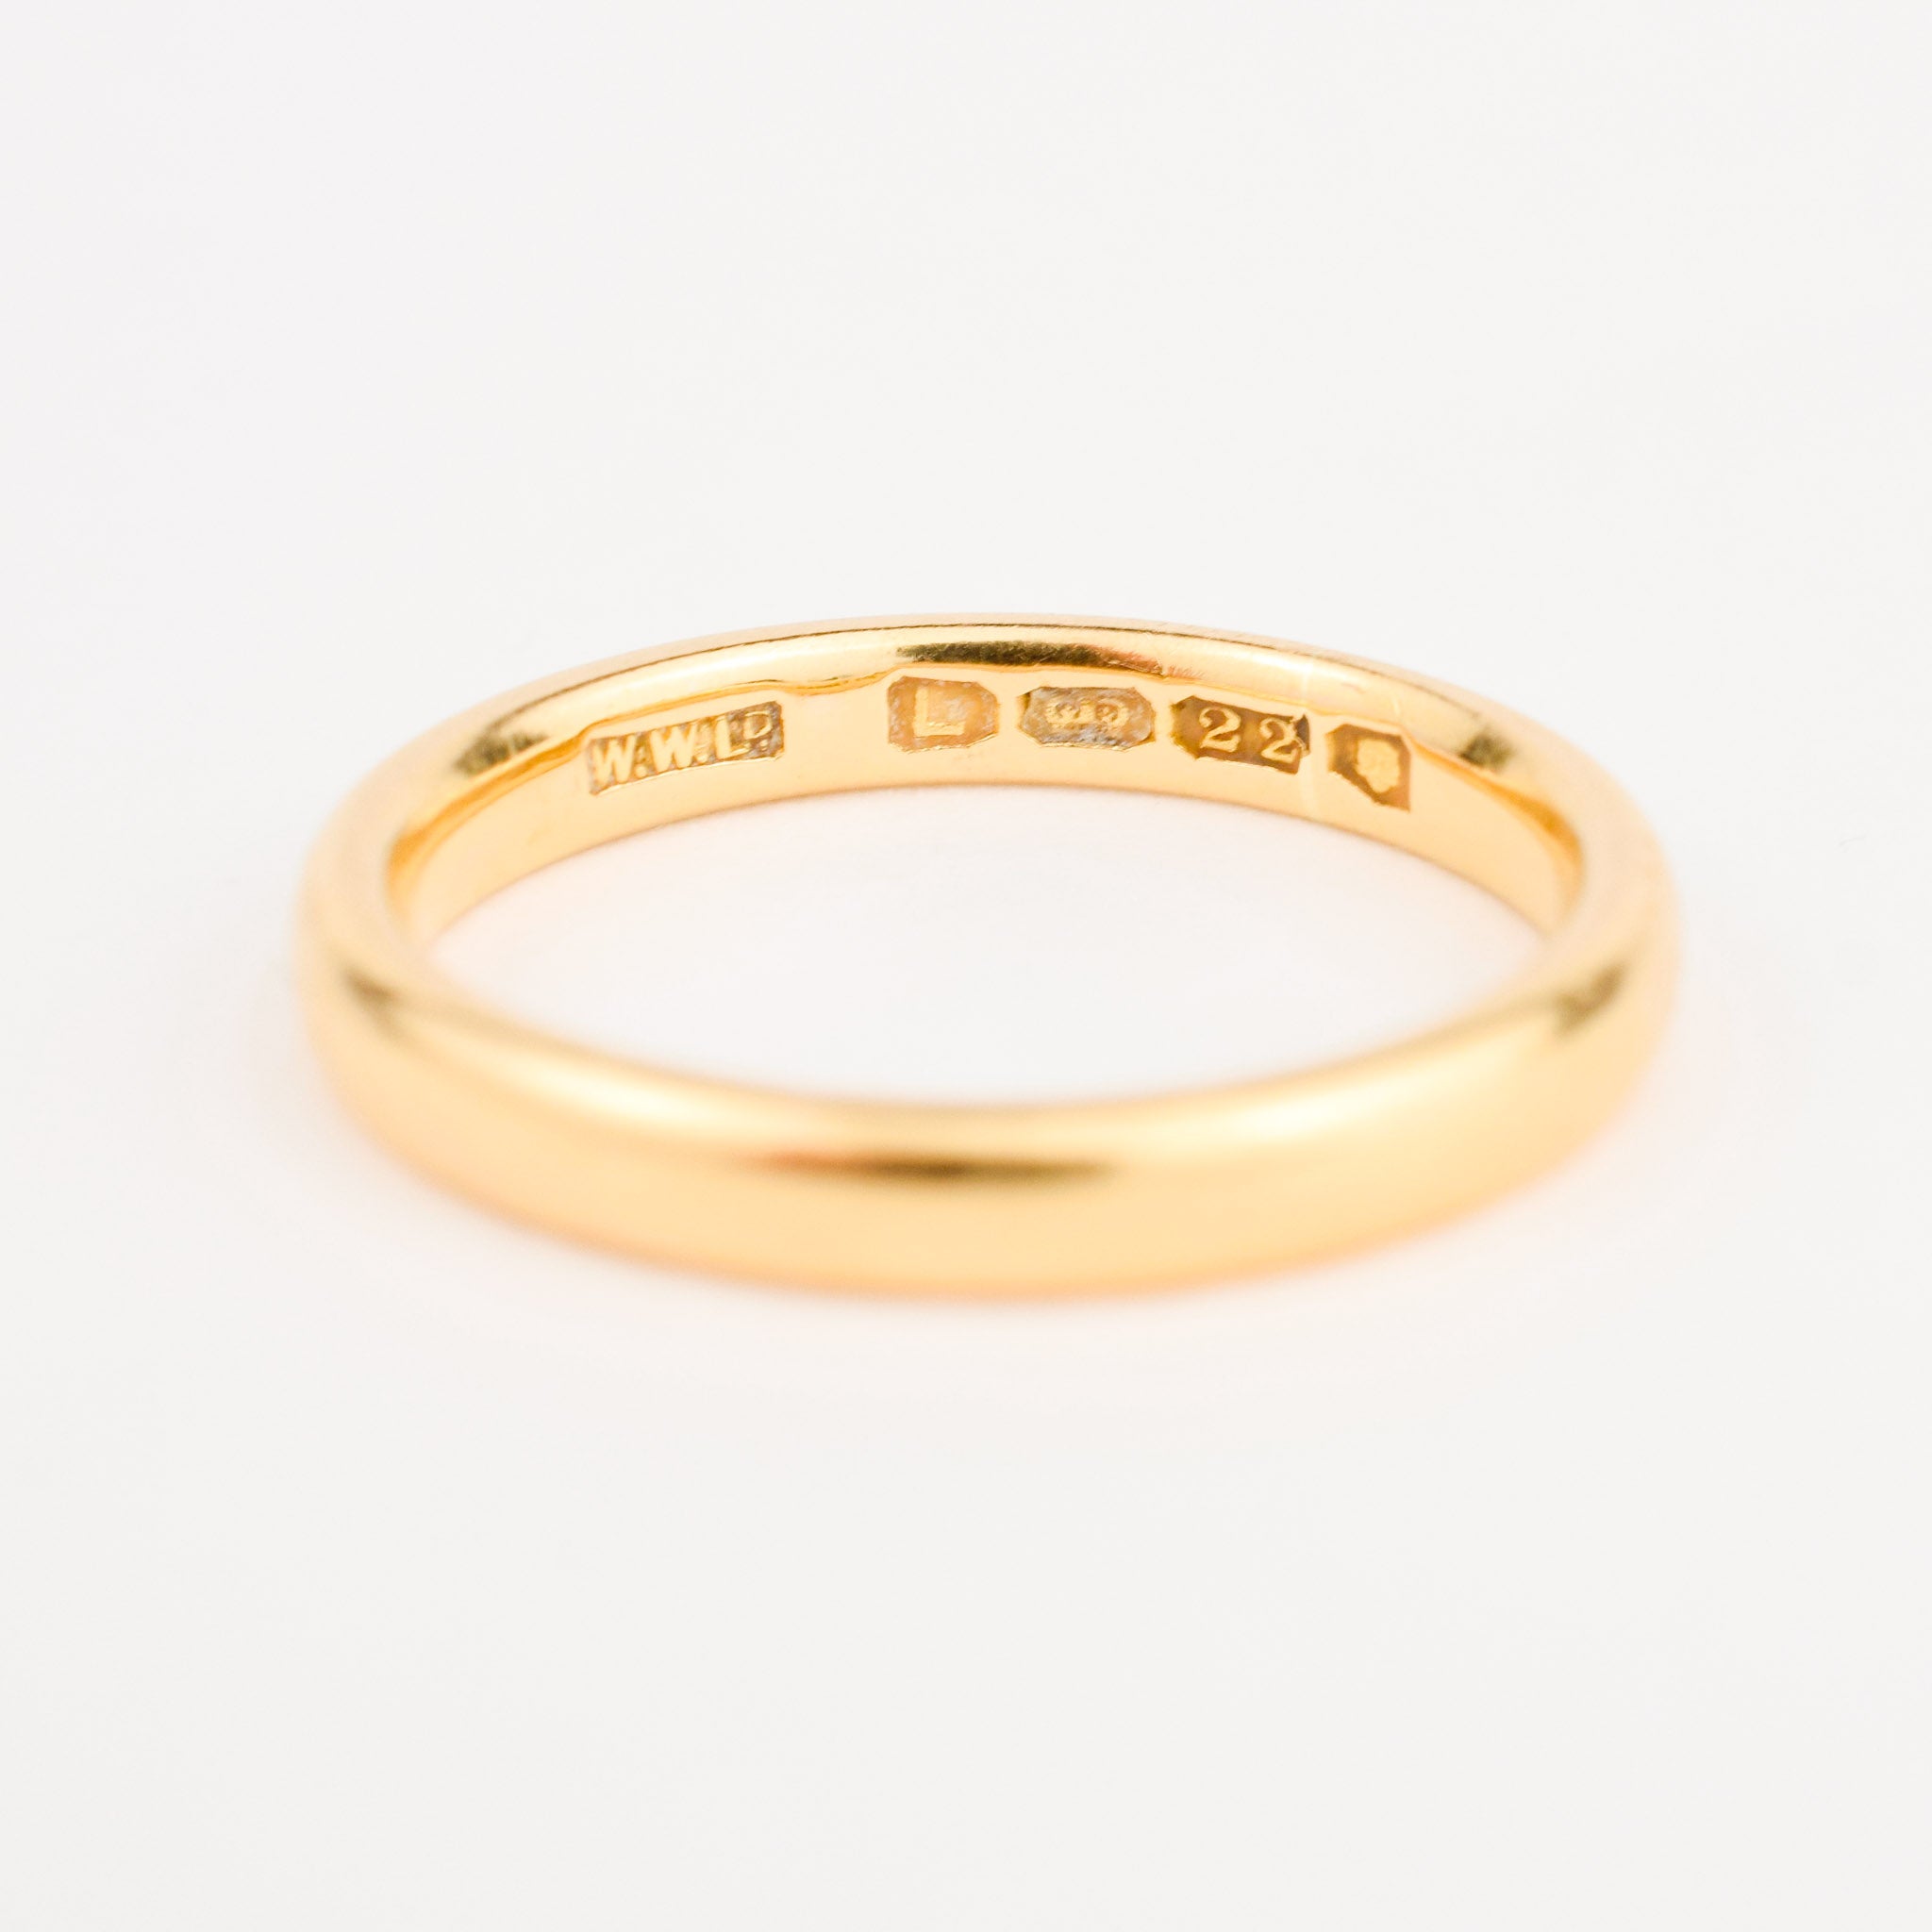 vintage 22k gold band *Assayed in London in 1946